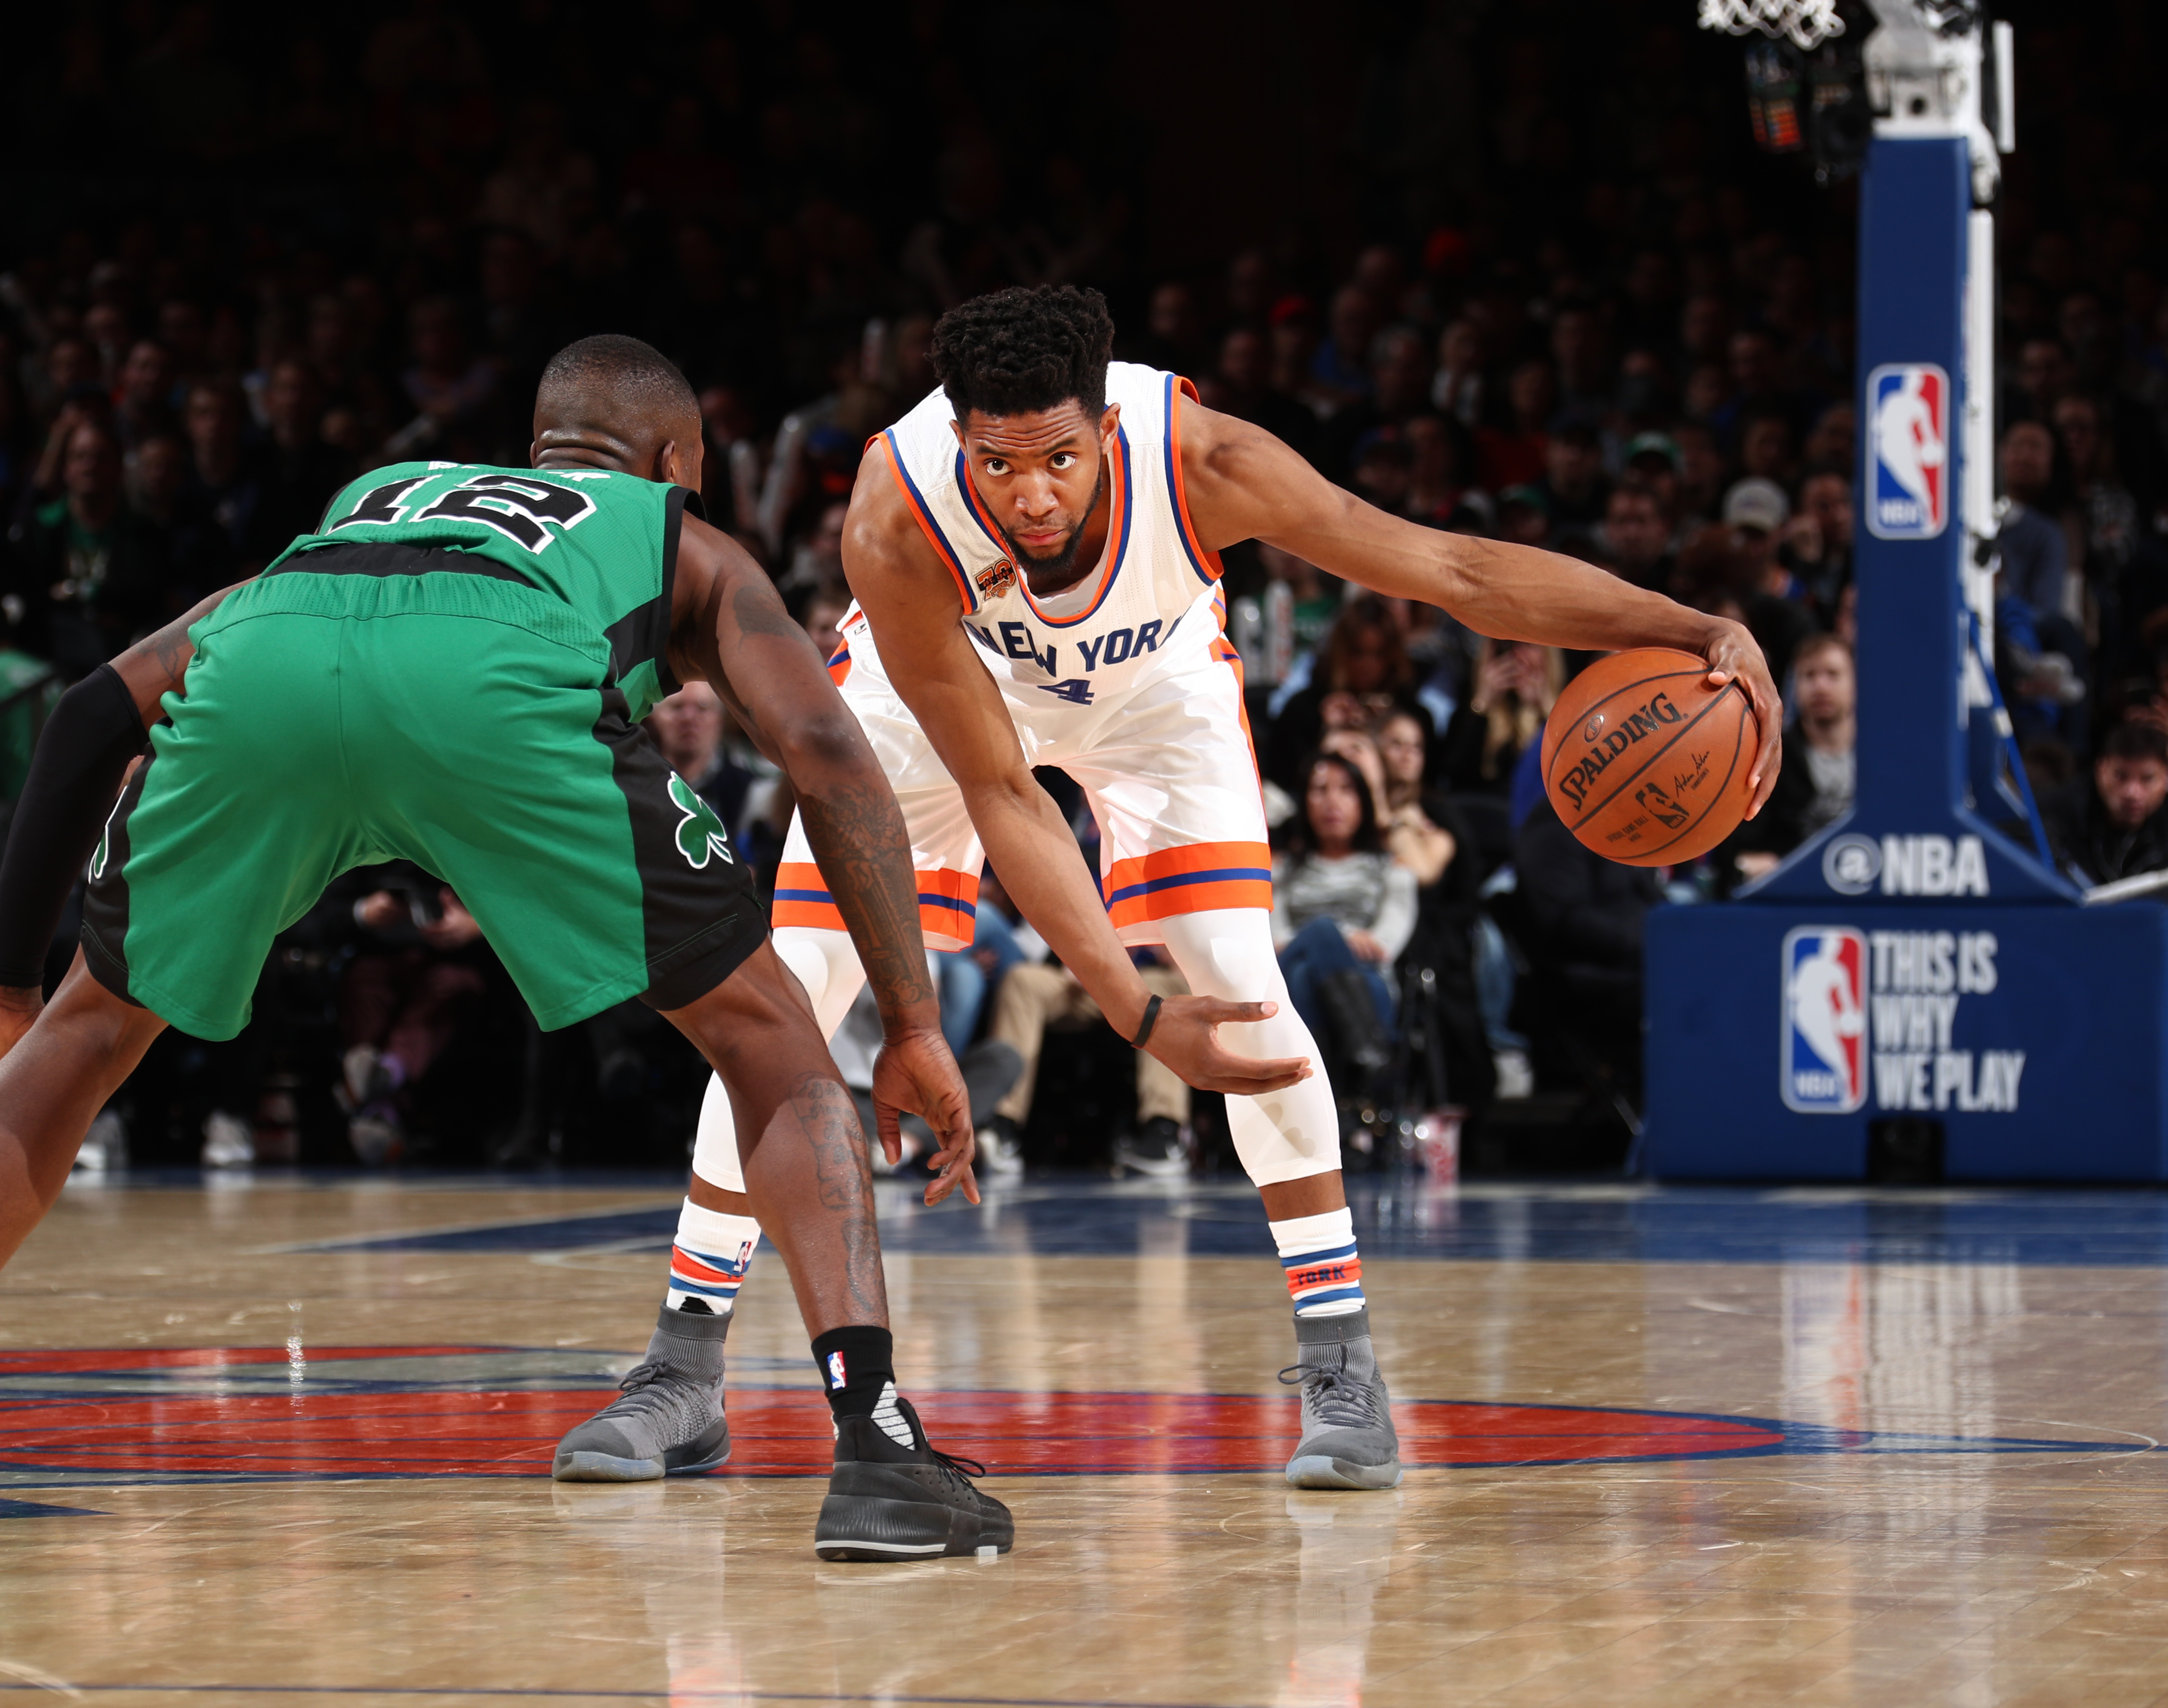 NEW YORK, NY - APRIL 2: Chasson Randle #4 of the New York Knicks handles the ball during a game against the Boston Celtics on April 2, 2017 at Madison Square Garden in New York City, New York. NOTE TO USER: User expressly acknowledges and agrees that, by downloading and/or using this photograph, user is consenting to the terms and conditions of the Getty Images License Agreement. Mandatory Copyright Notice: Copyright 2017 NBAE (Photo by Nathaniel S. Butler/NBAE via Getty Images)